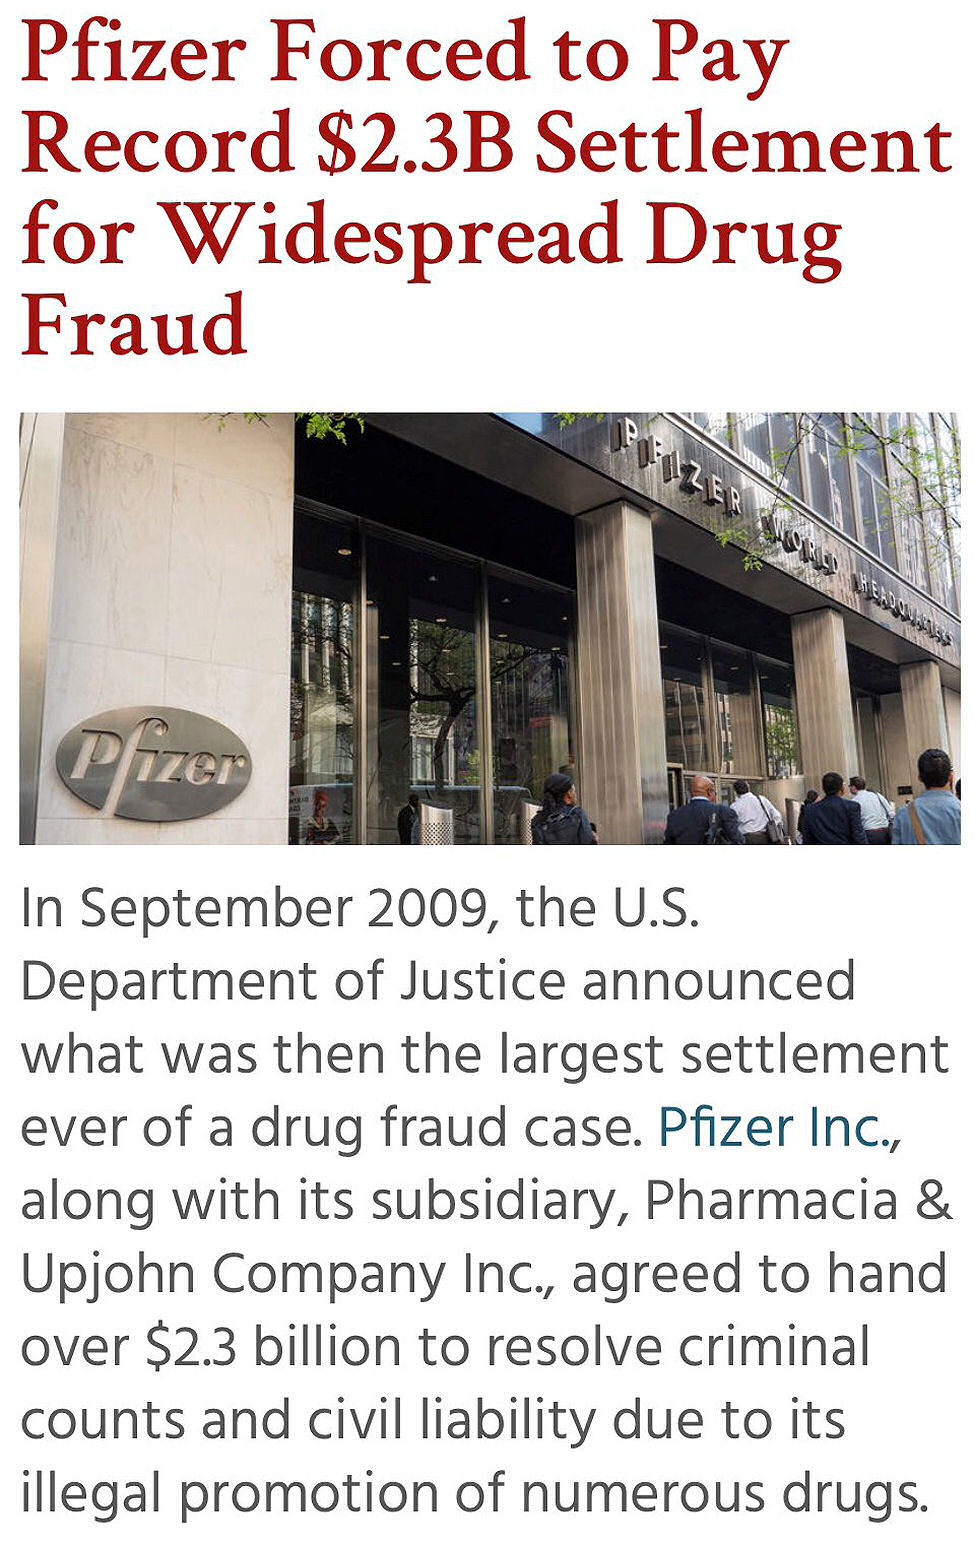 Pfizer forced to pay record $2.3B settlement for widespread drug fraud